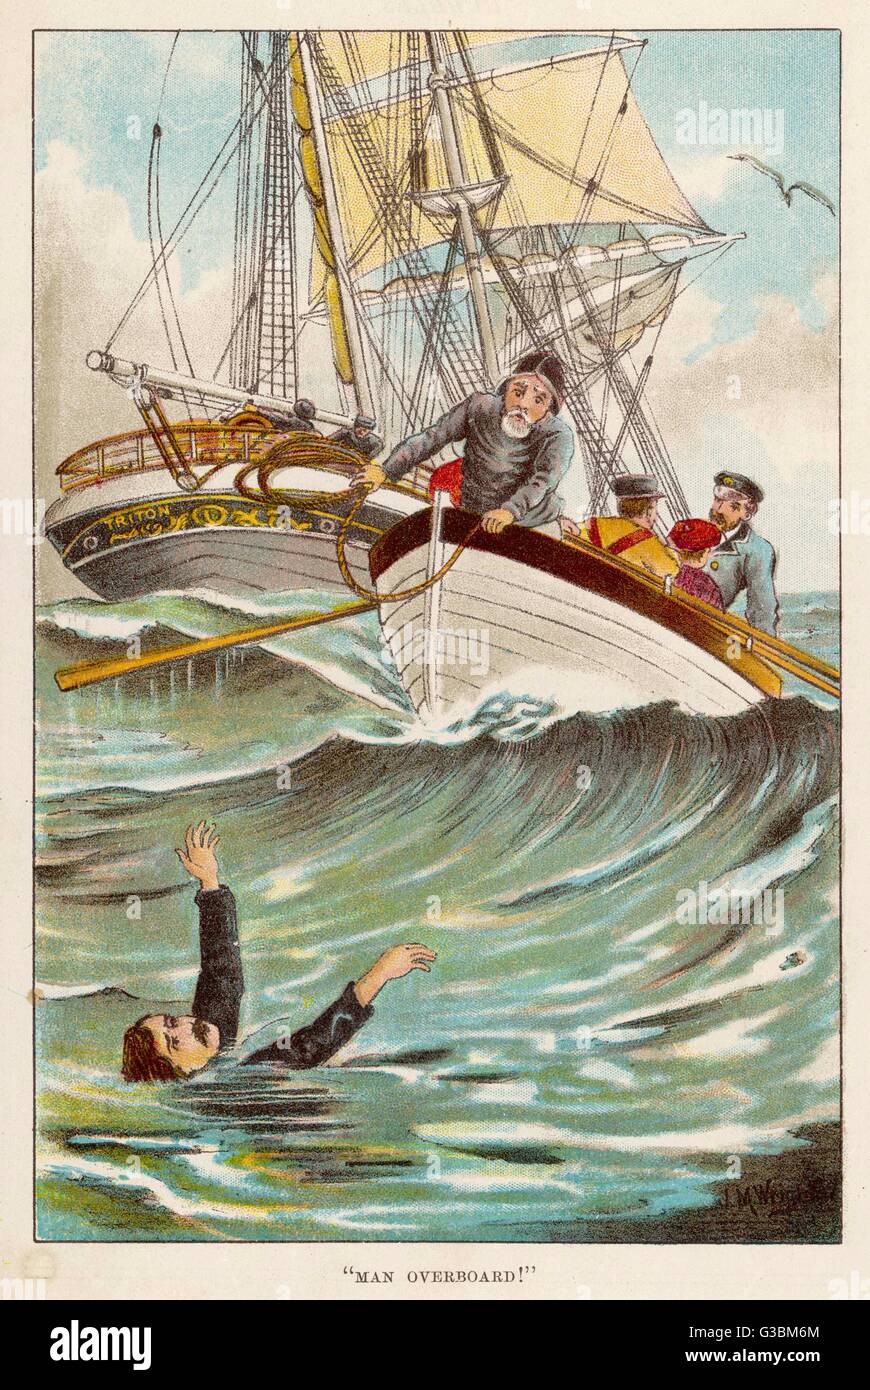 Having fallen off his ship,  this man is jolly pleased that  his shipmates were able to  lower a boat and come to his  rescue.     Date: circa 1895 Stock Photo